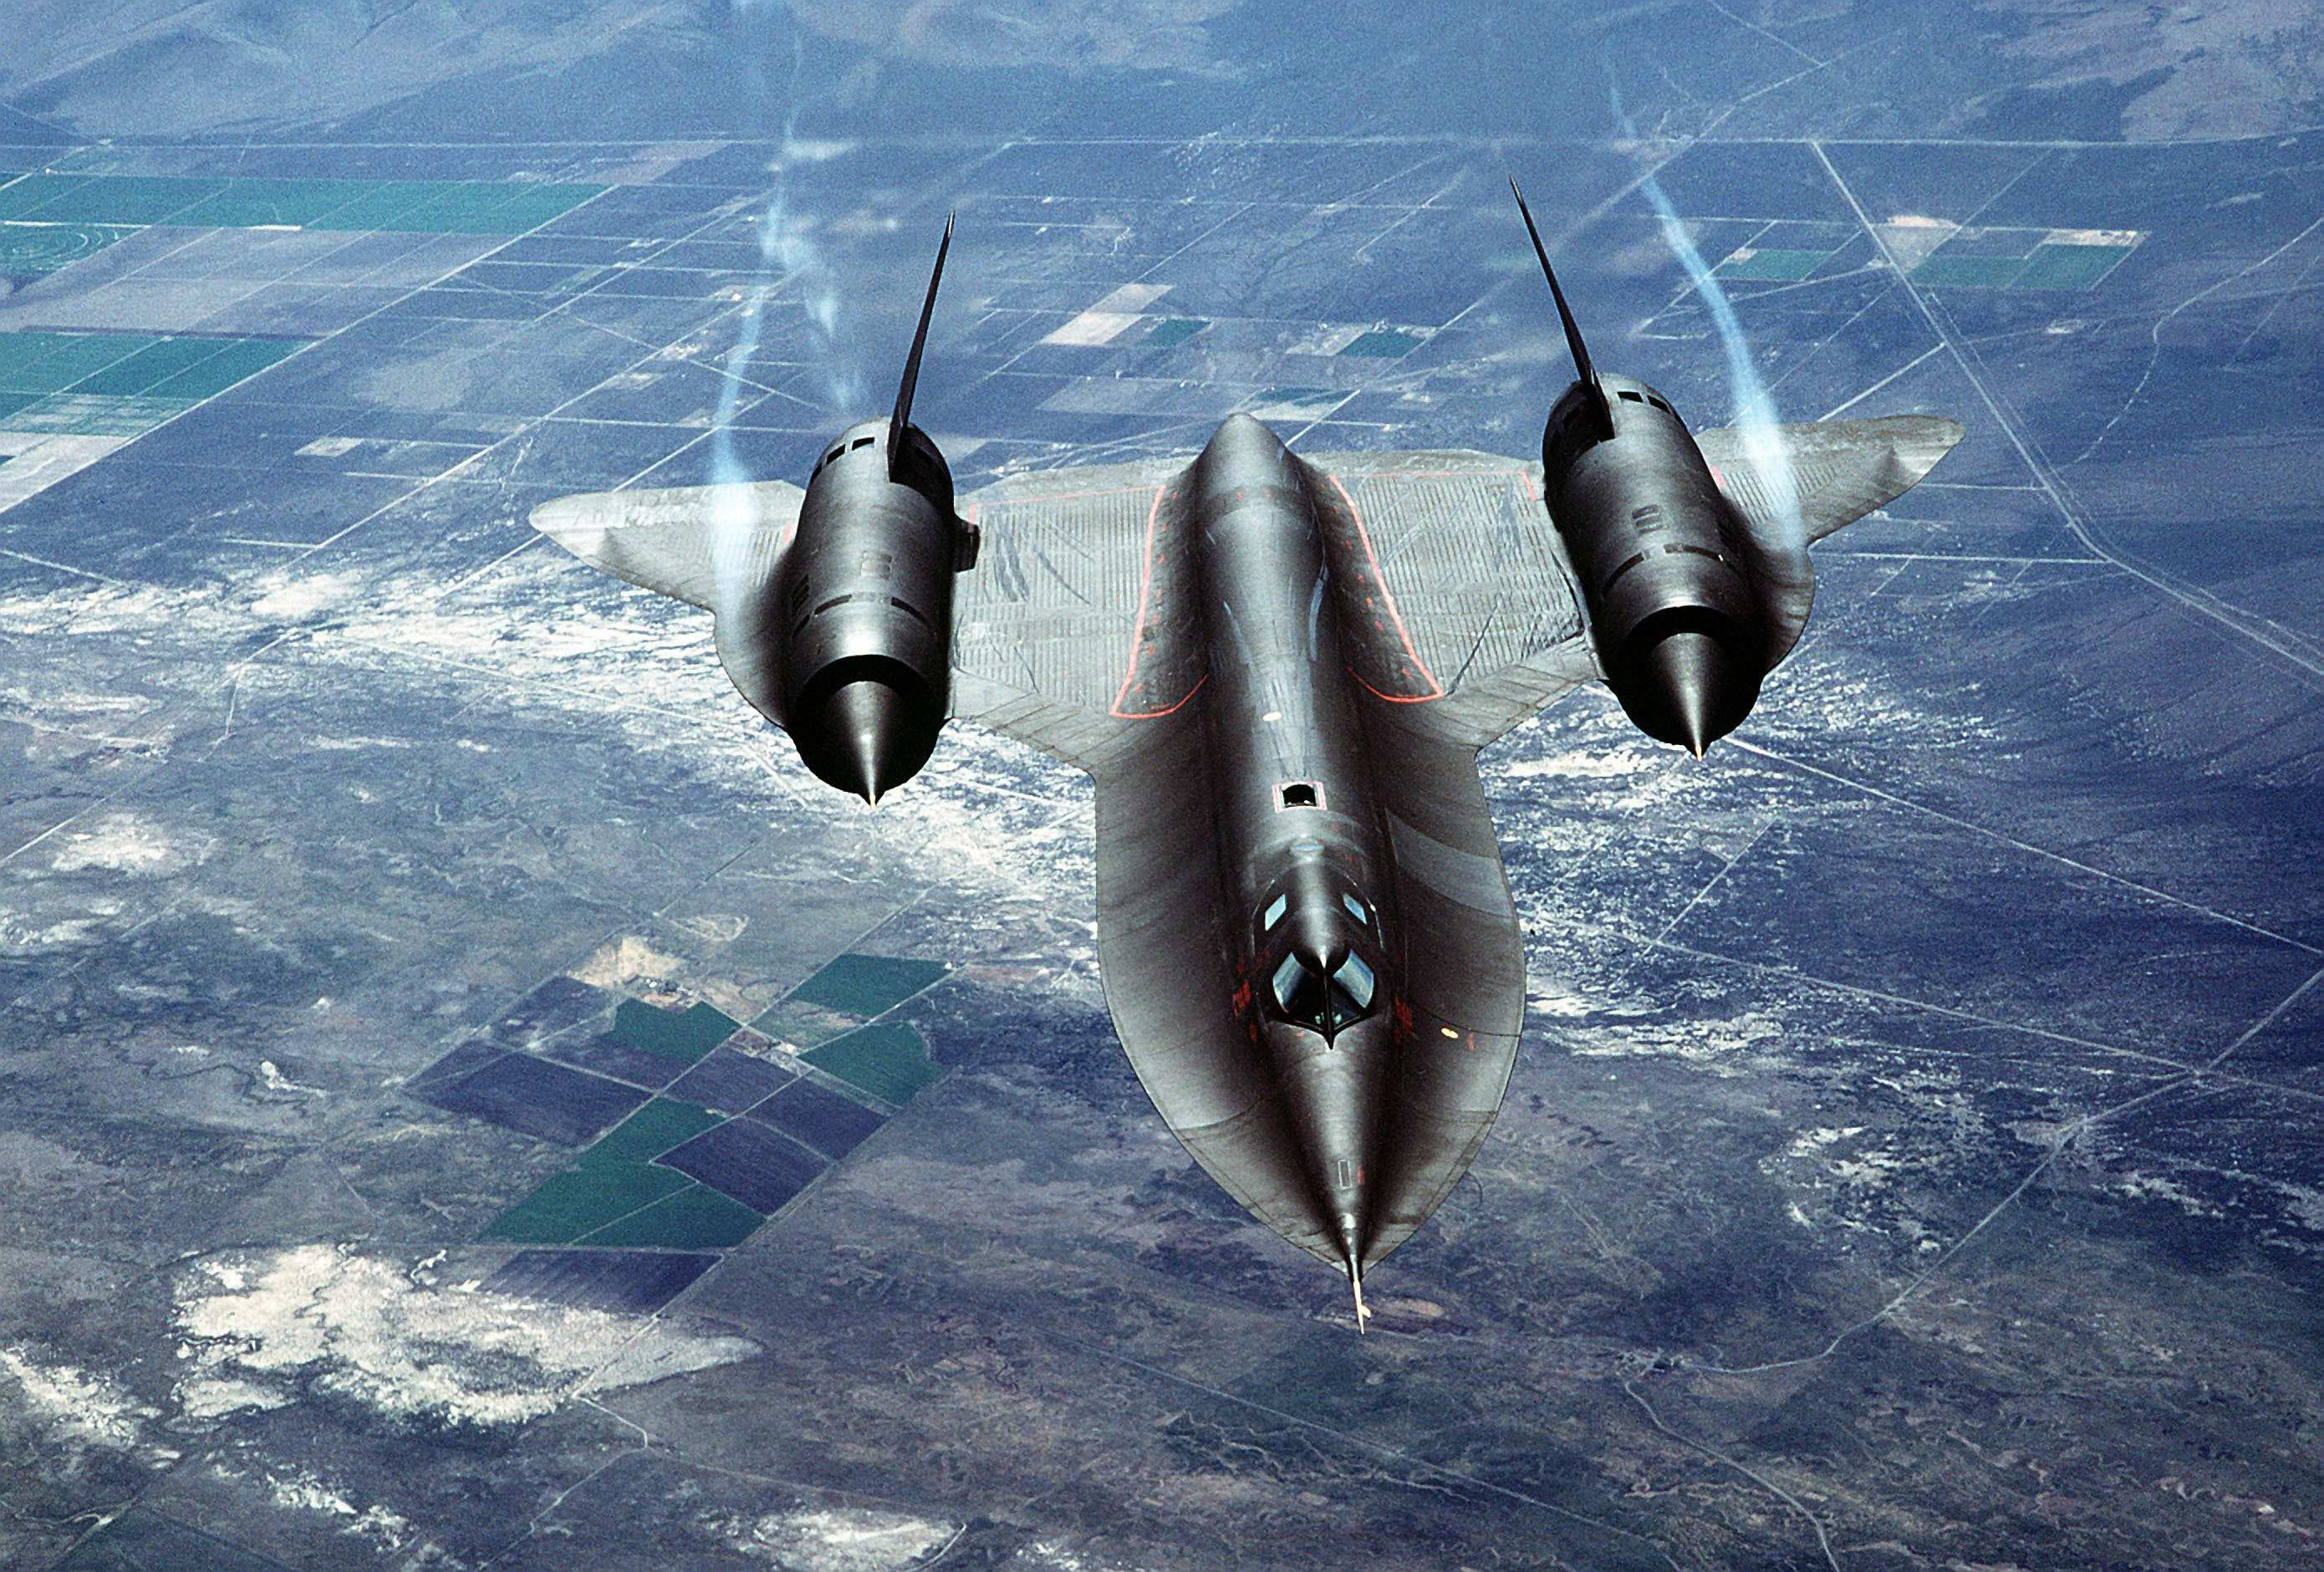 SR-71 Blackbird Fly, gray and black fighter jet planes, Aircrafts / Planes